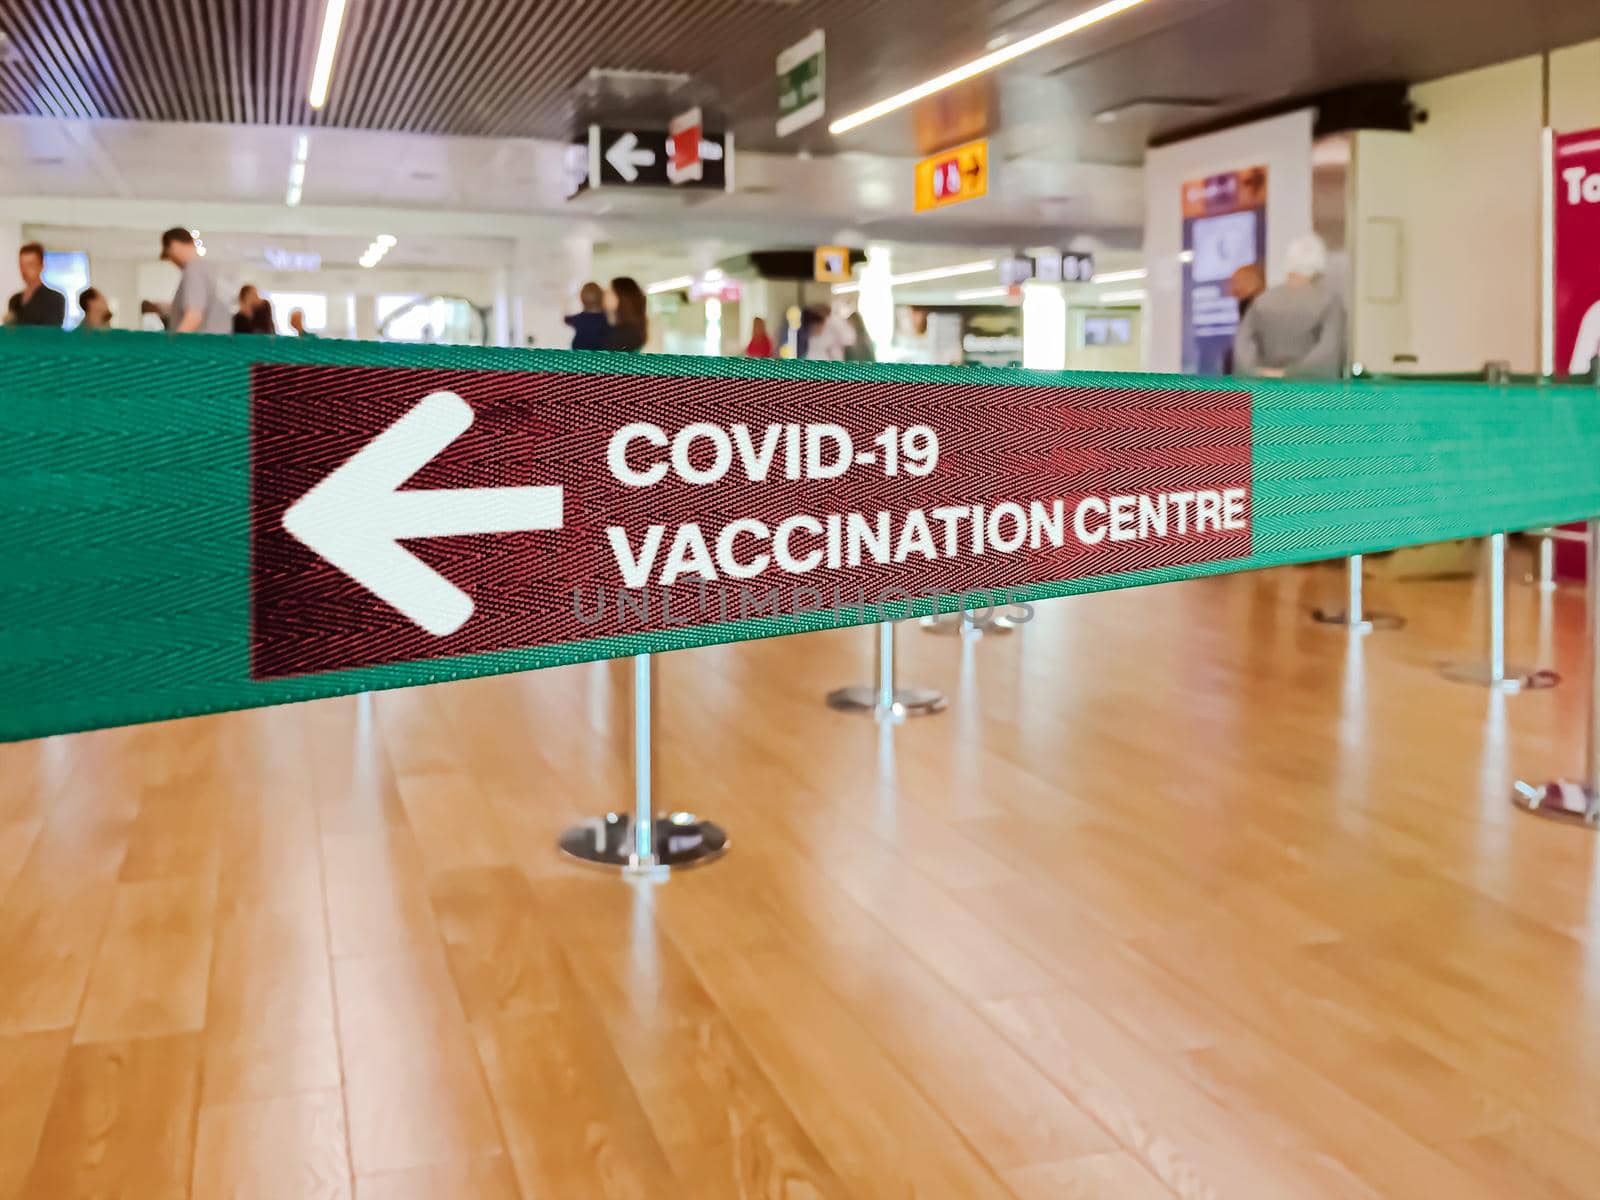 Green ribbon with a left arrow to indicate the Covid-19 vaccination centre. Covid-19 vaccination schedule. Coronavirus pandemic and prevention